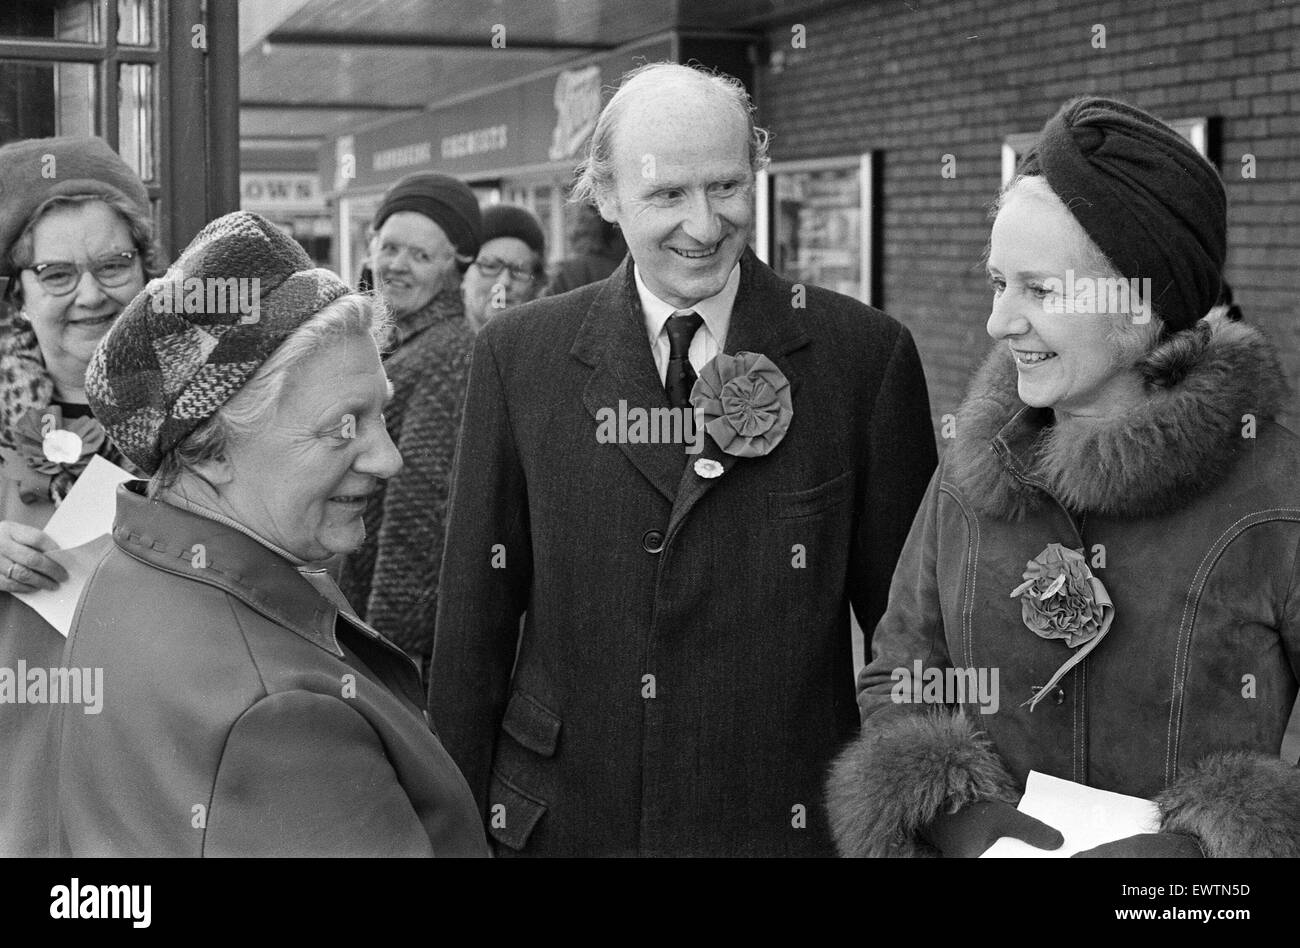 Anthony Barber, Chancellor of the Exchequer and Conservative Member of Parliament for Altrincham and Sale, pictured campaigning with wife Jean in Altrincham and Sale, Greater Manchester, ahead of 1974 General Election, 23rd February 1974. Stock Photo